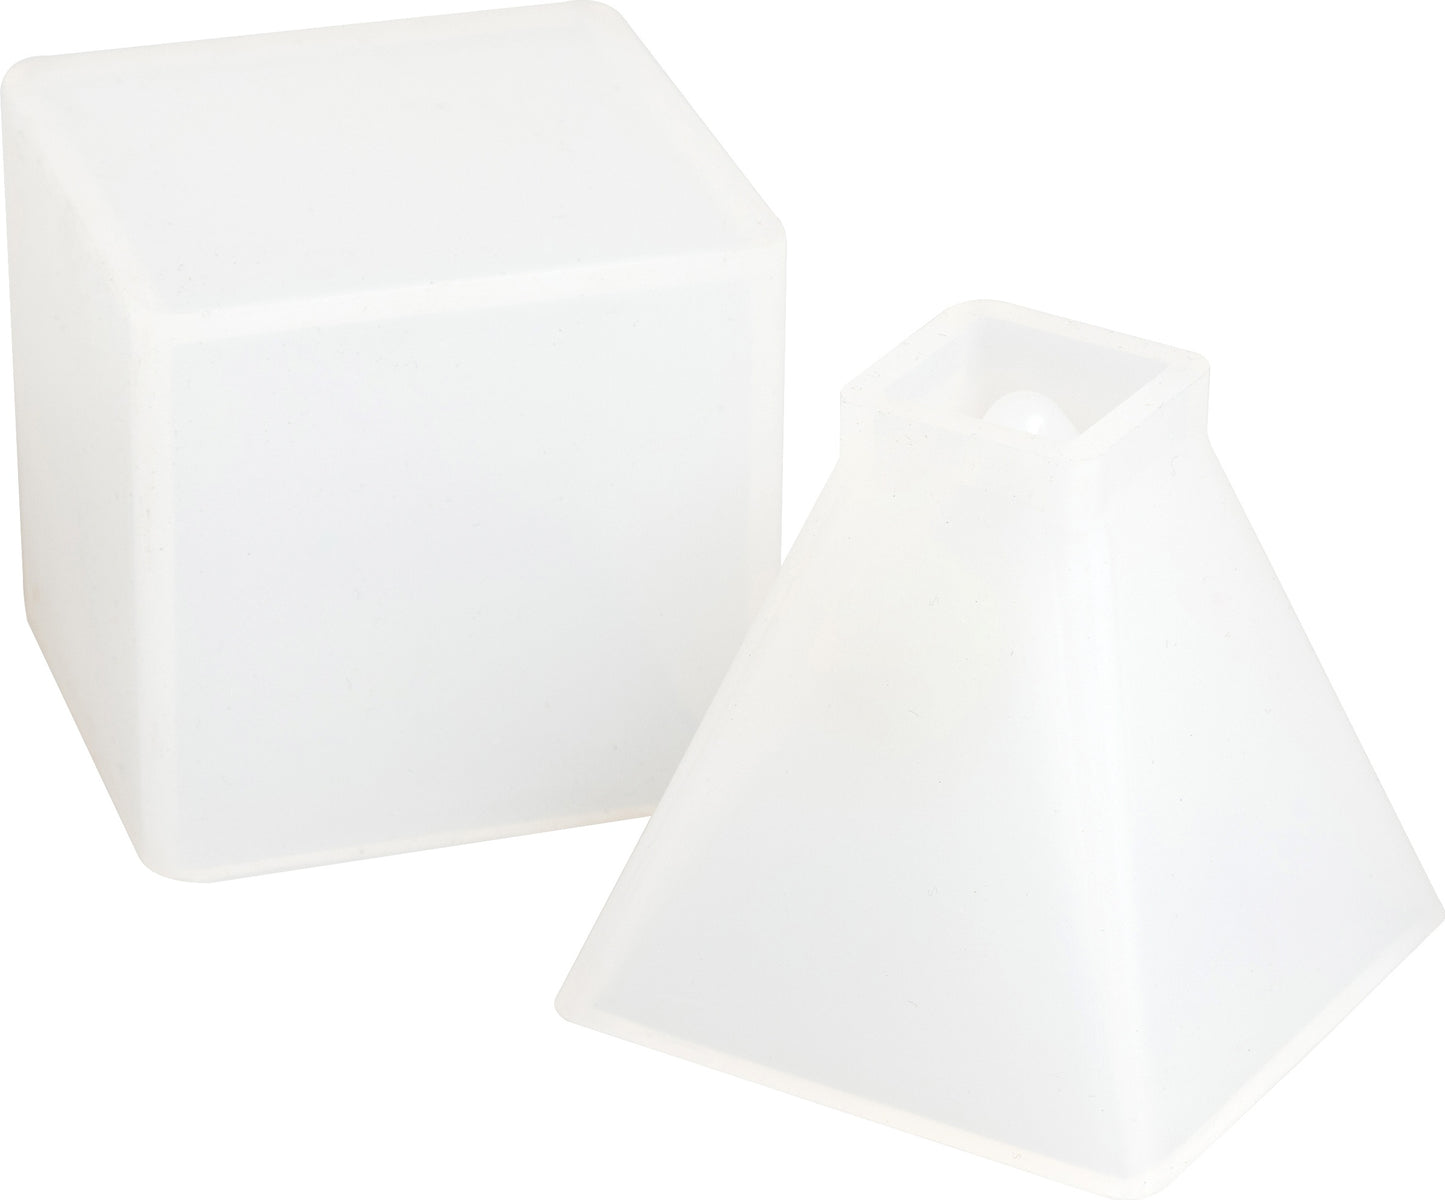 American Crafts Color Pour Resin Mold 2/Pkg-Paper Weight - Cube & Pyramid